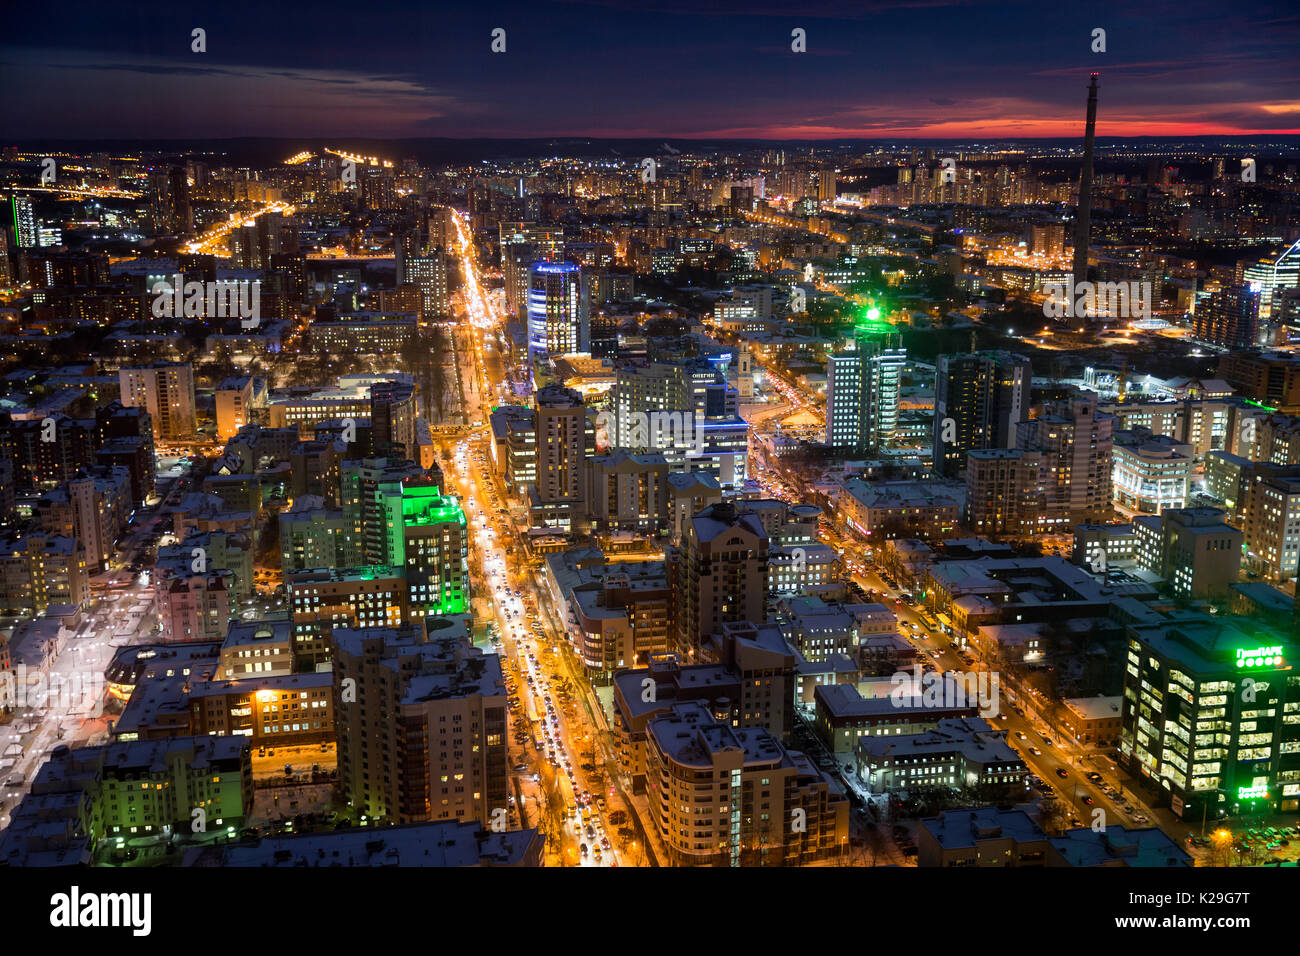 Ekaterinburg at night. The beautiful appearance is tantamount to the fact that it is regarded as AIDS and drug capital in Russia. Stock Photo